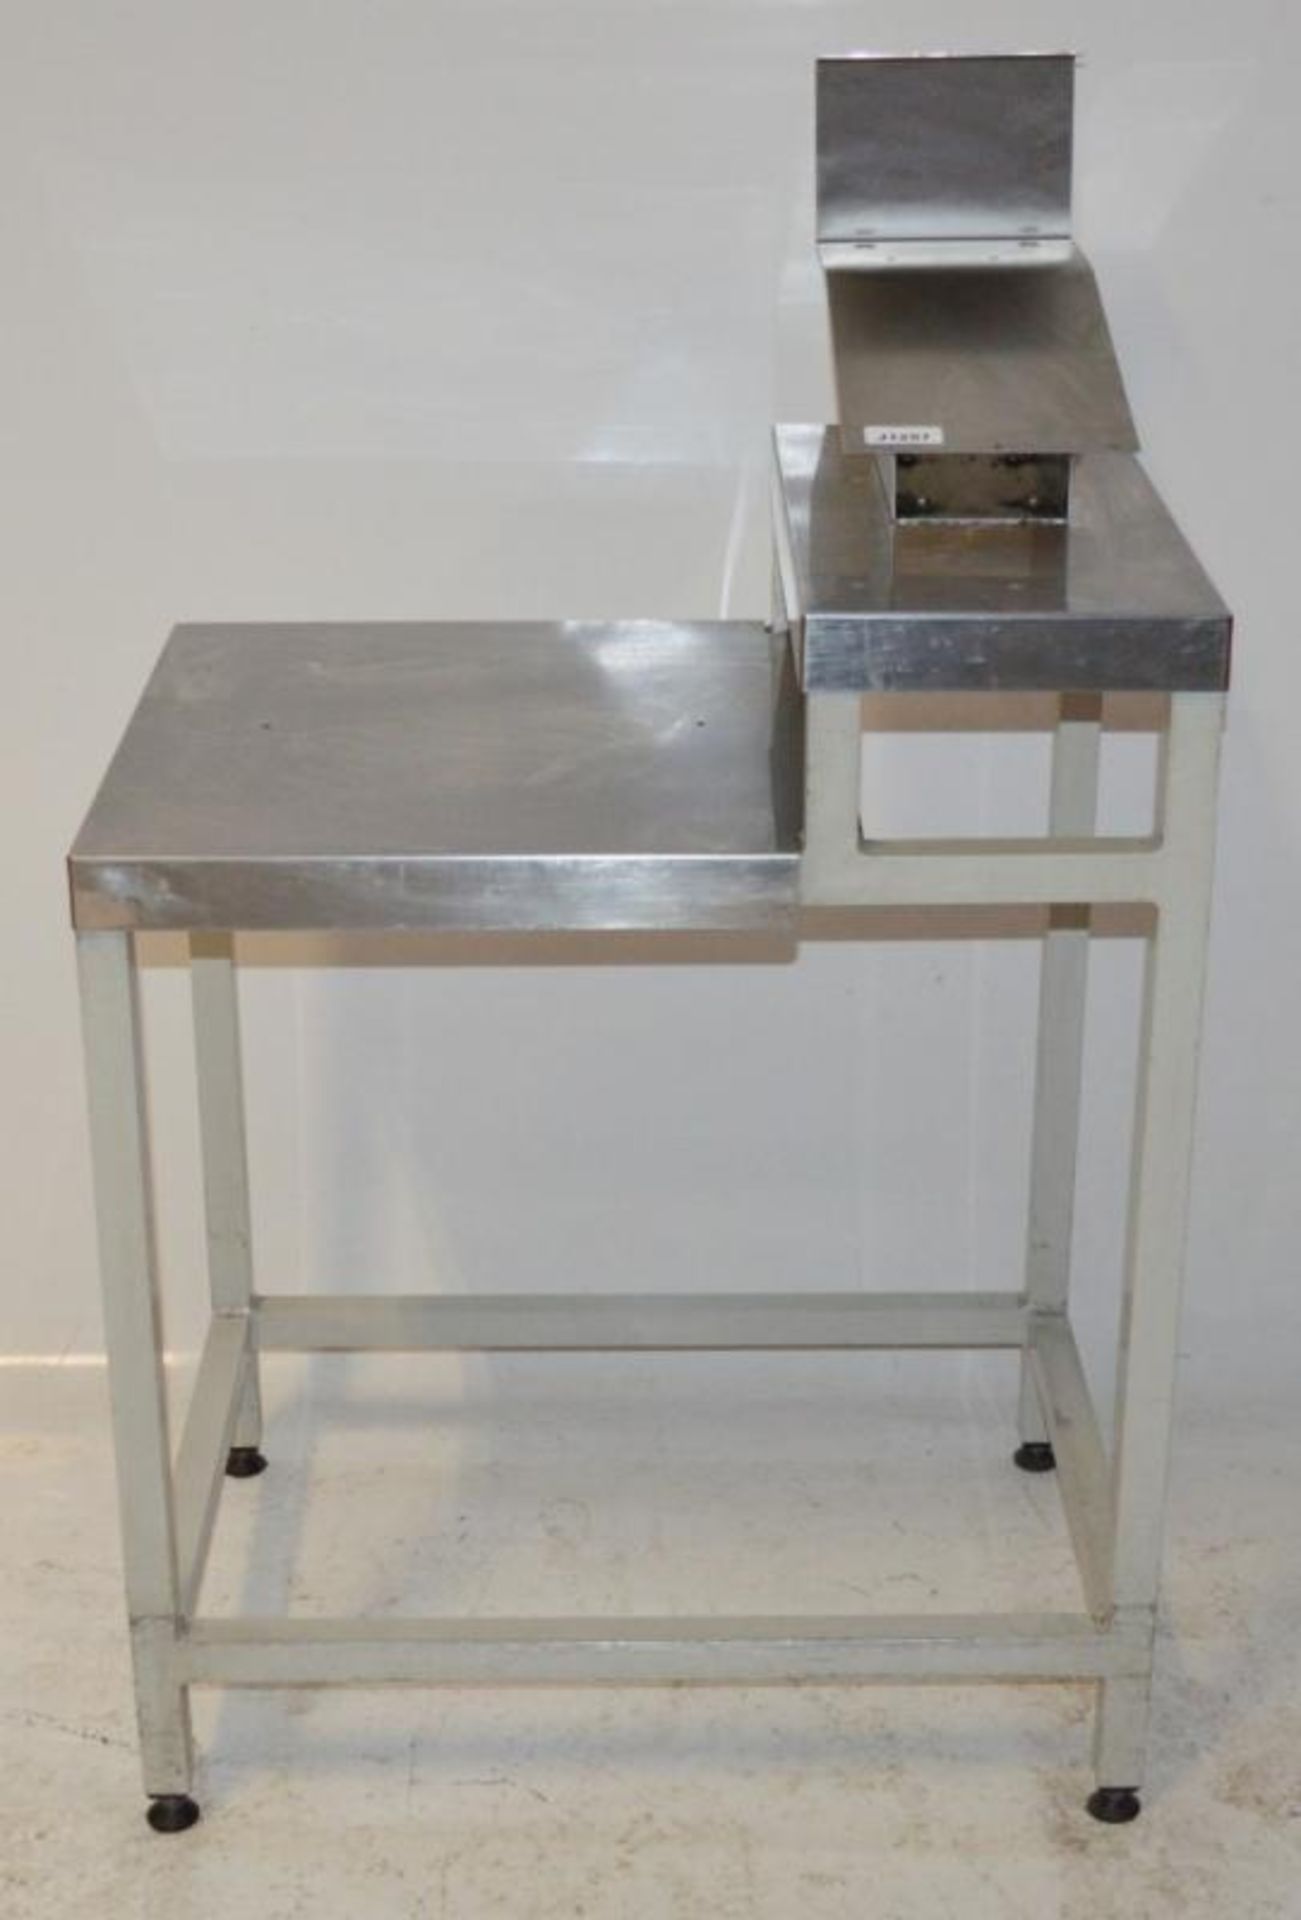 1 x Preperation Work Table With Stainless Steel Top - CL232 - Ref J1257 - H75/89.5 x W71 x D52 cms -